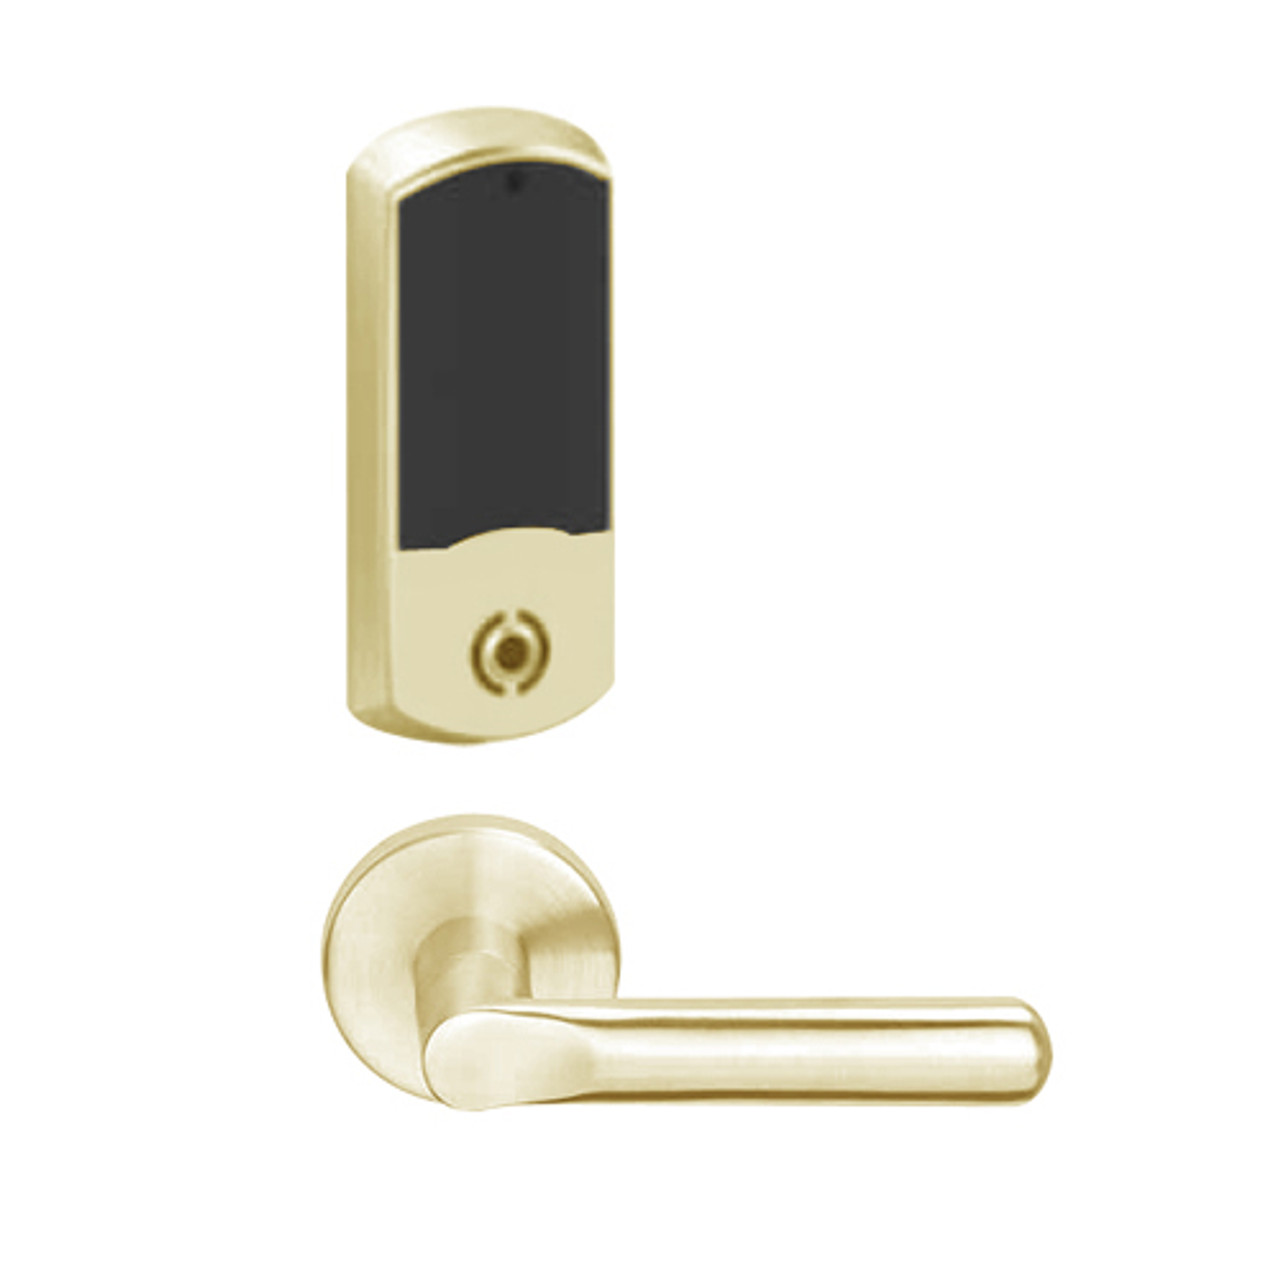 LEMS-GRW-P-18-606-00B Schlage Storeroom Wireless Greenwich Mortise Lock with LED Indicator and 18 Lever in Satin Brass